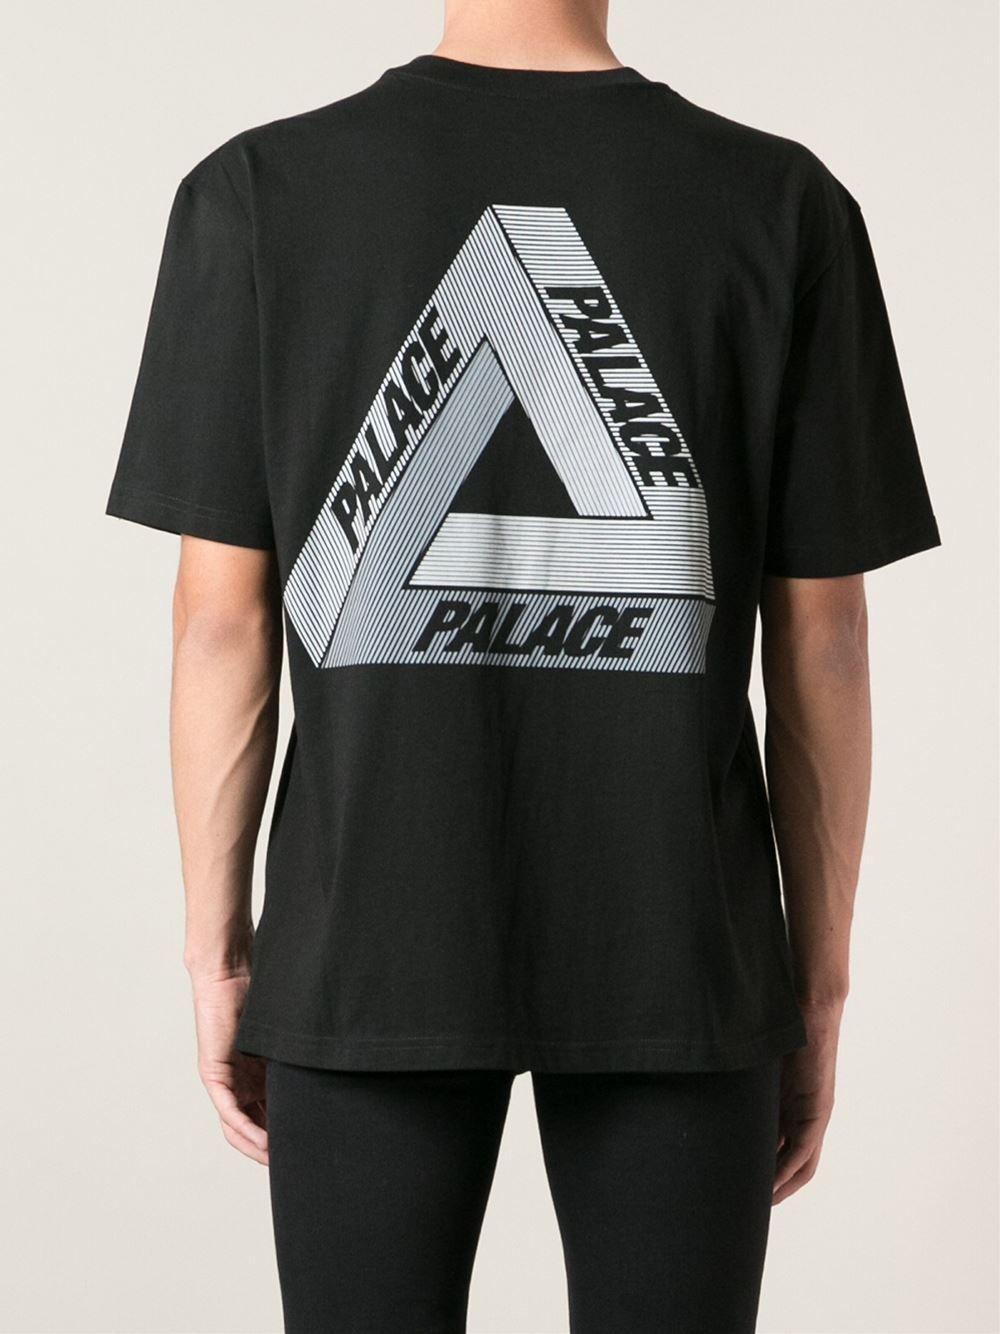 Palace Clothes Logo - Palace Logo T-Shirt in Black for Men - Lyst